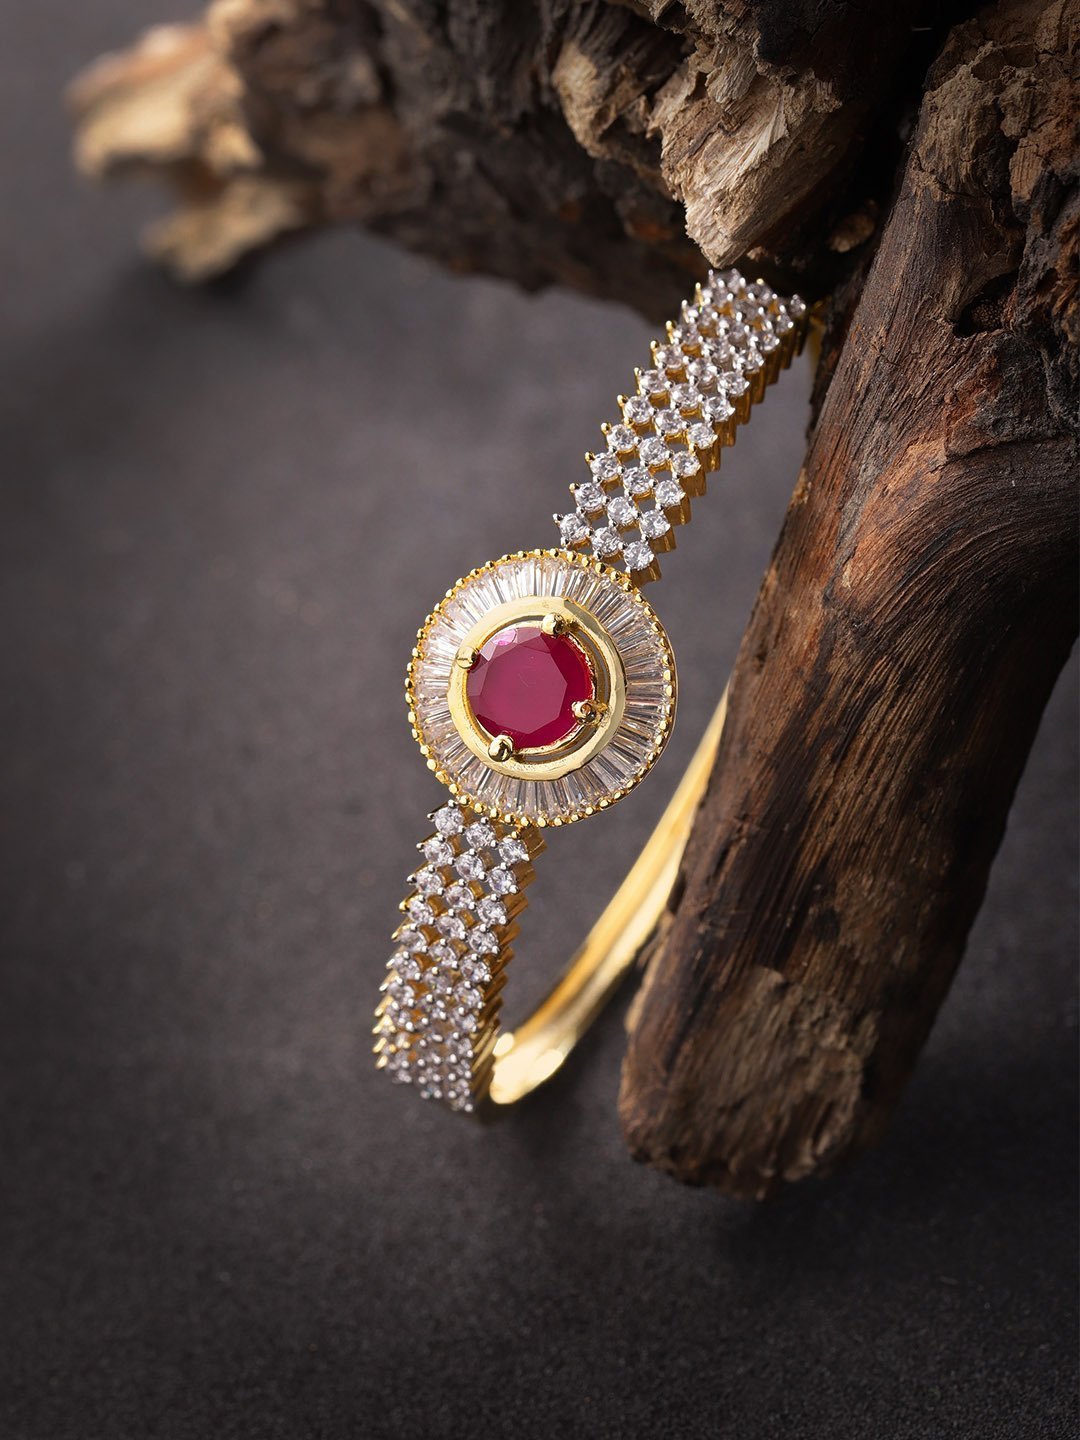 Women's Gold-Plated American Diamond and Ruby Studded Bracelet in Pink Color - Priyaasi